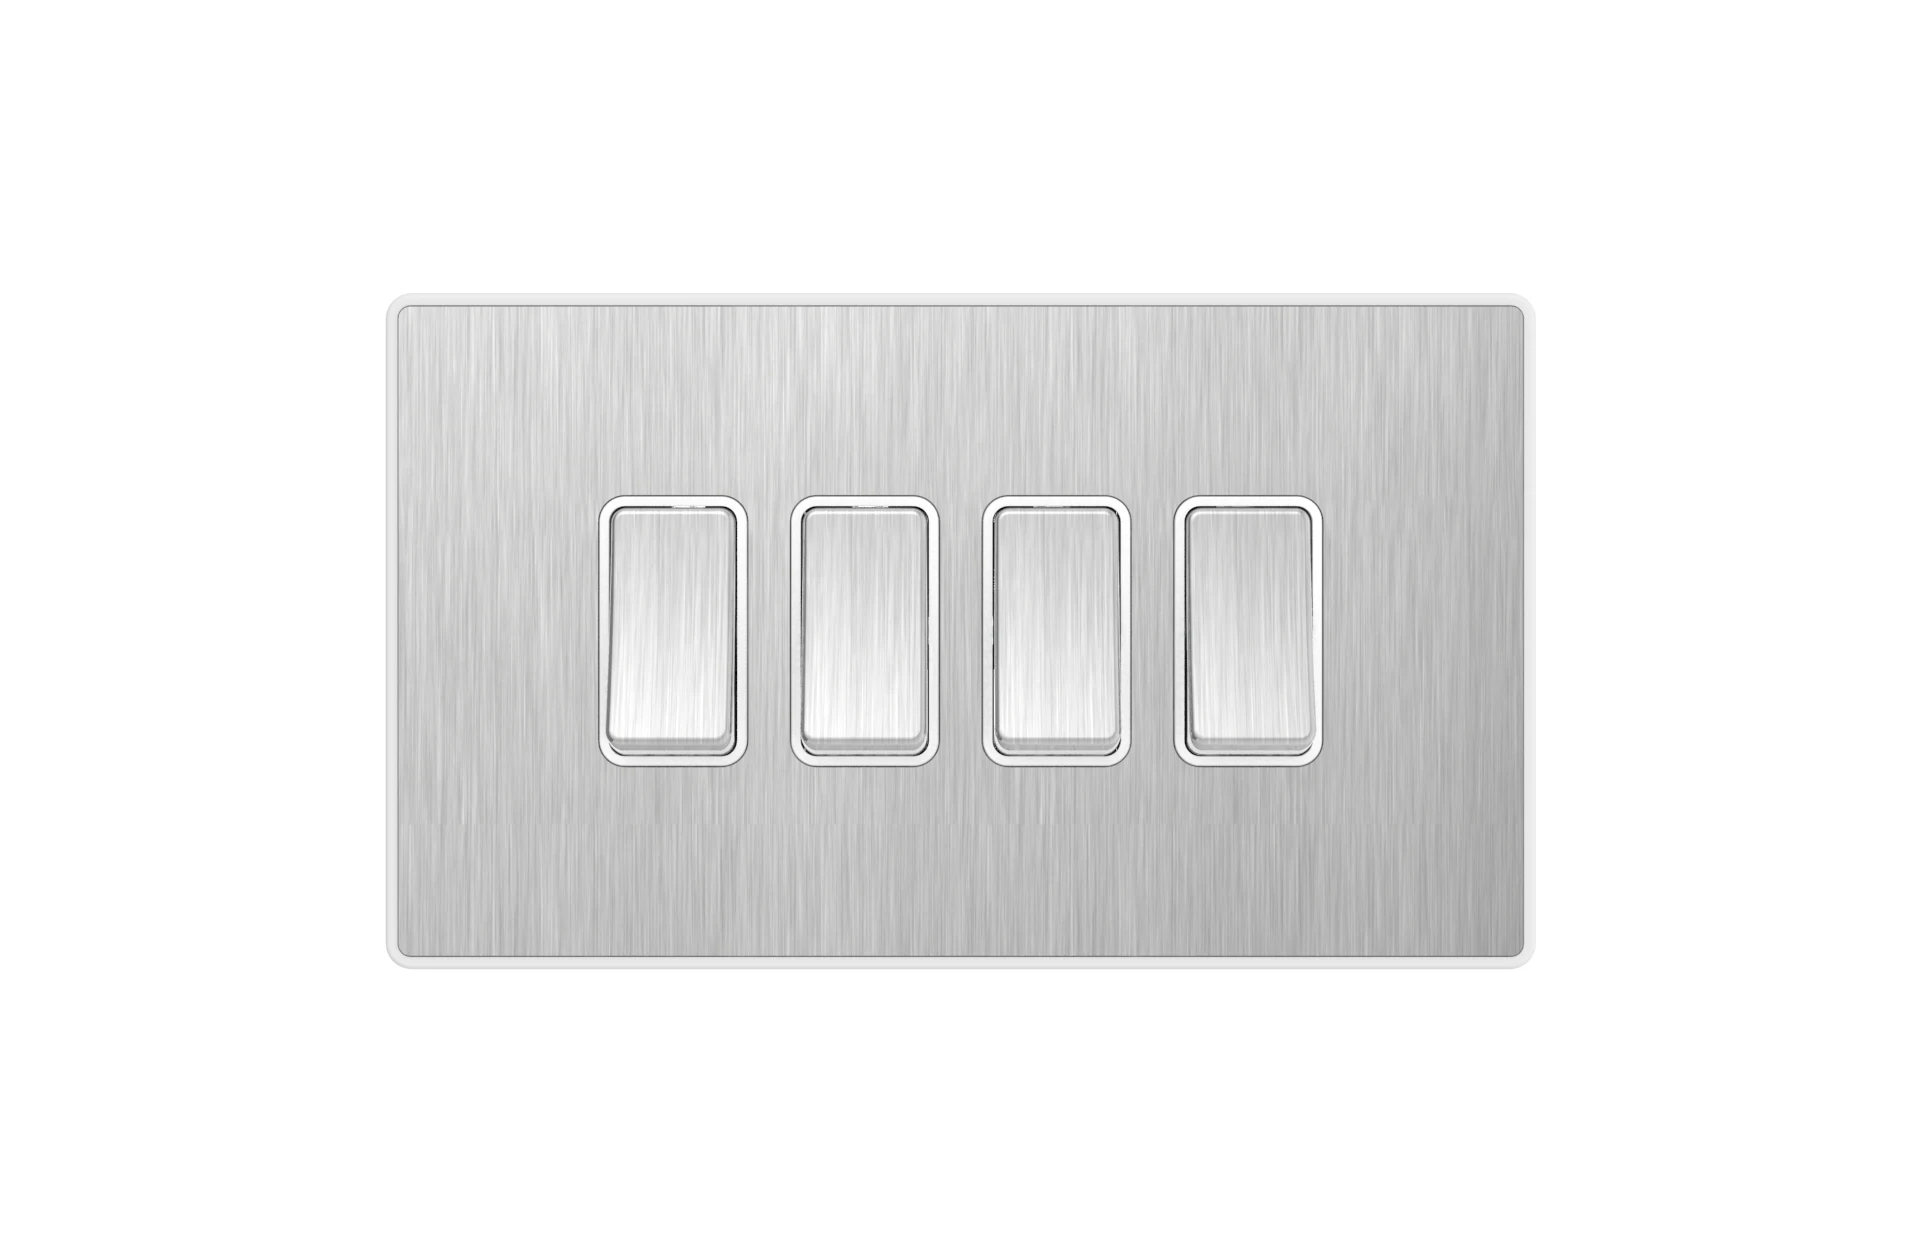 Stainless steel 10 A british standard 4gang uk thin wall switch